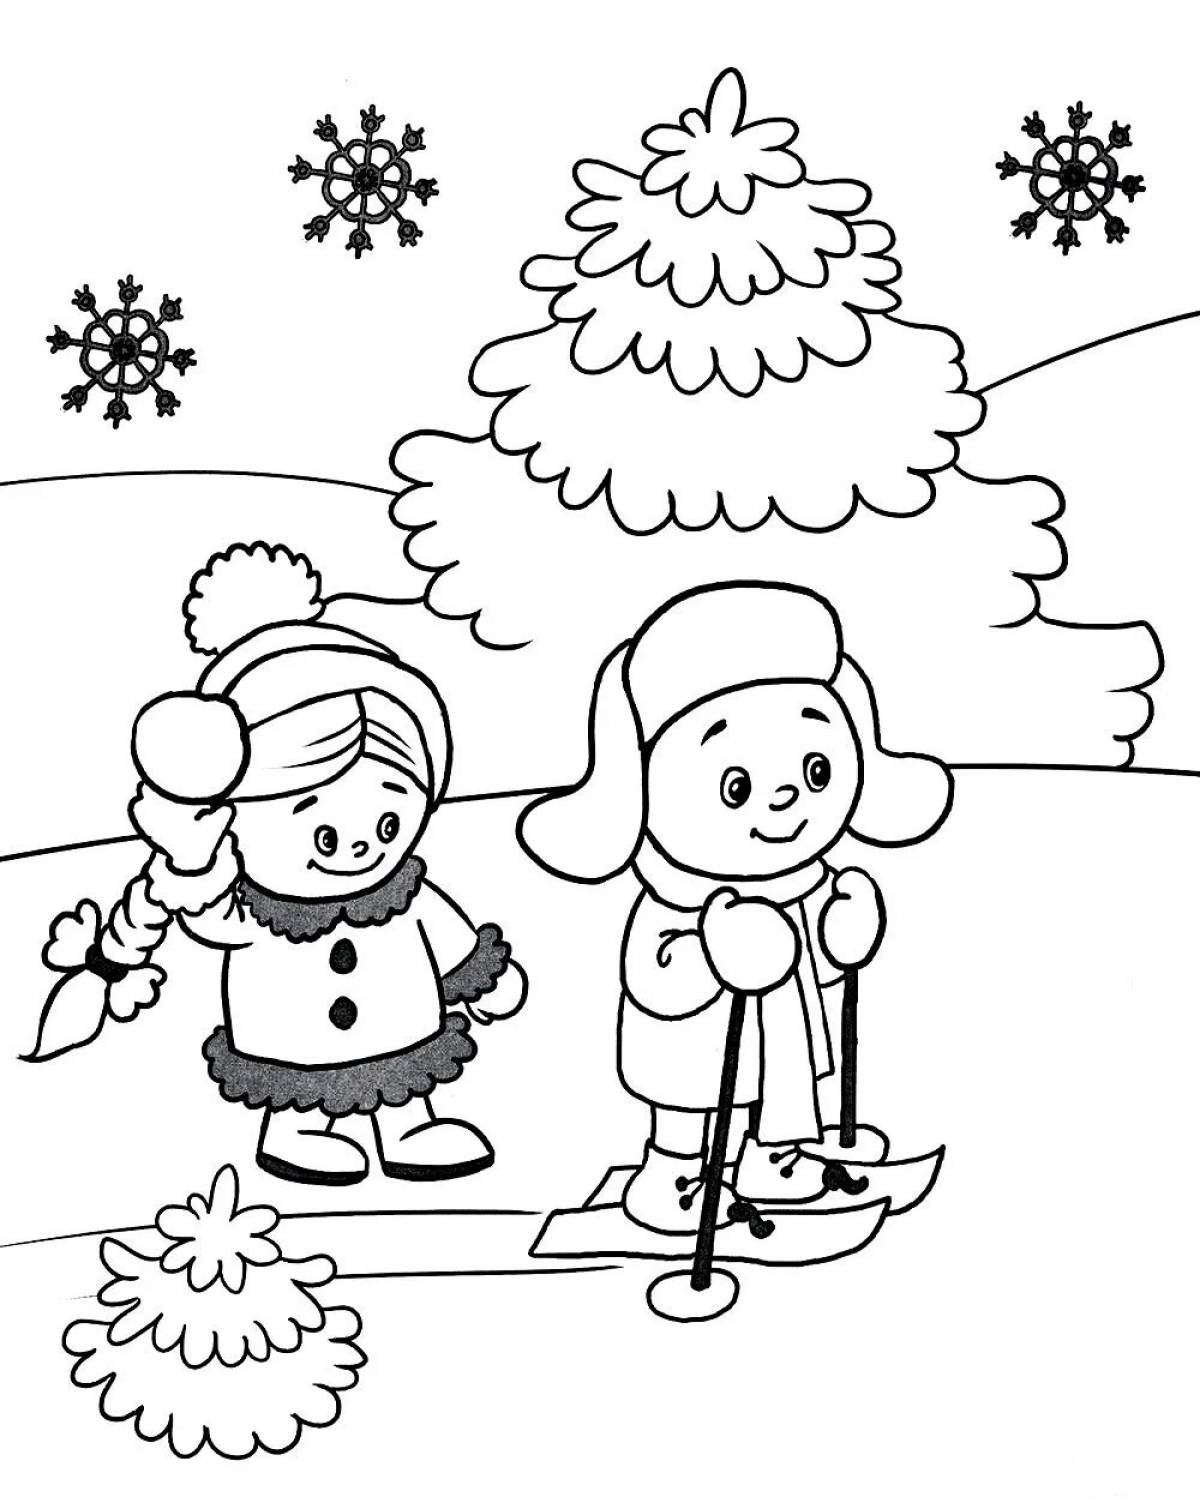 Soulful winter coloring book for children